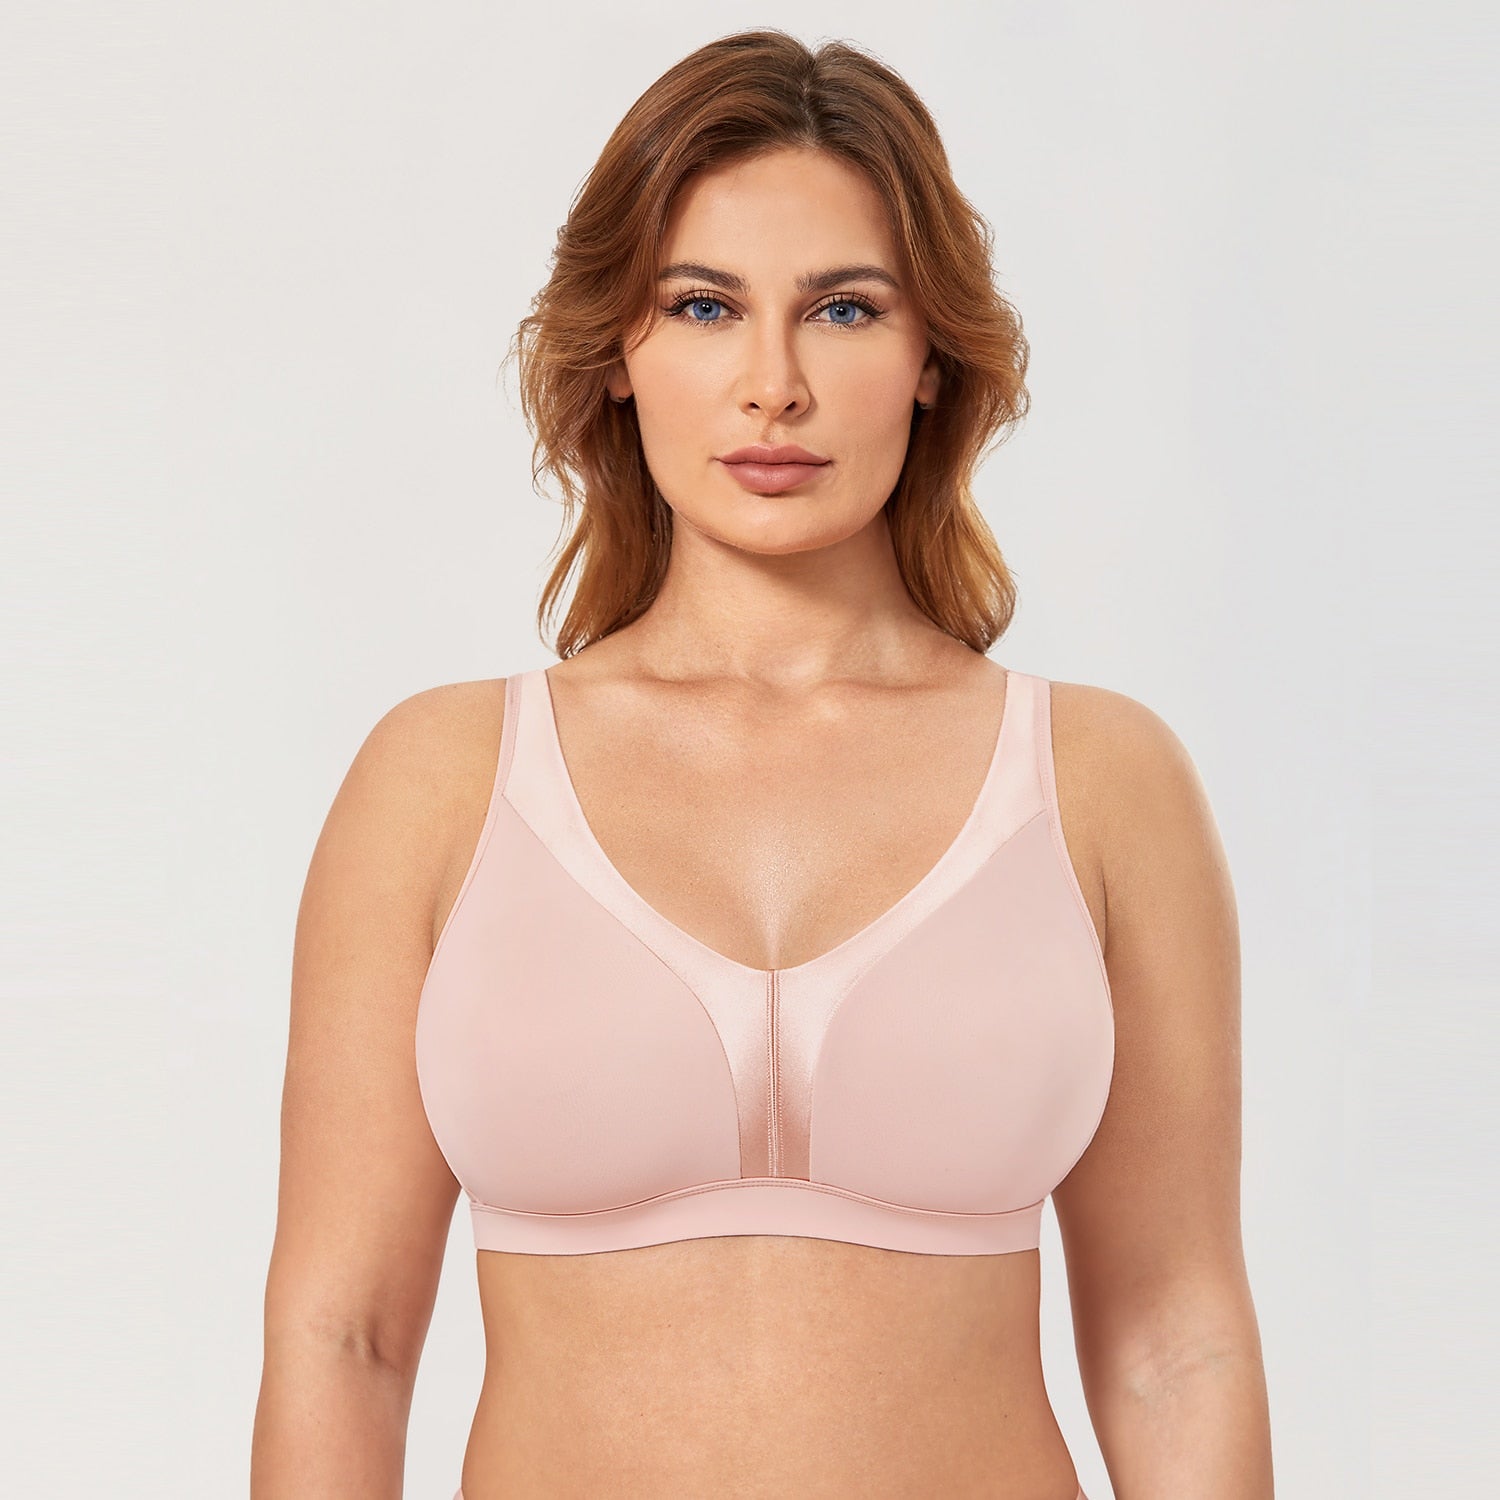 NEW Wireless Smooth Bra - Full Coverage & Comfortable! Neutral Colors